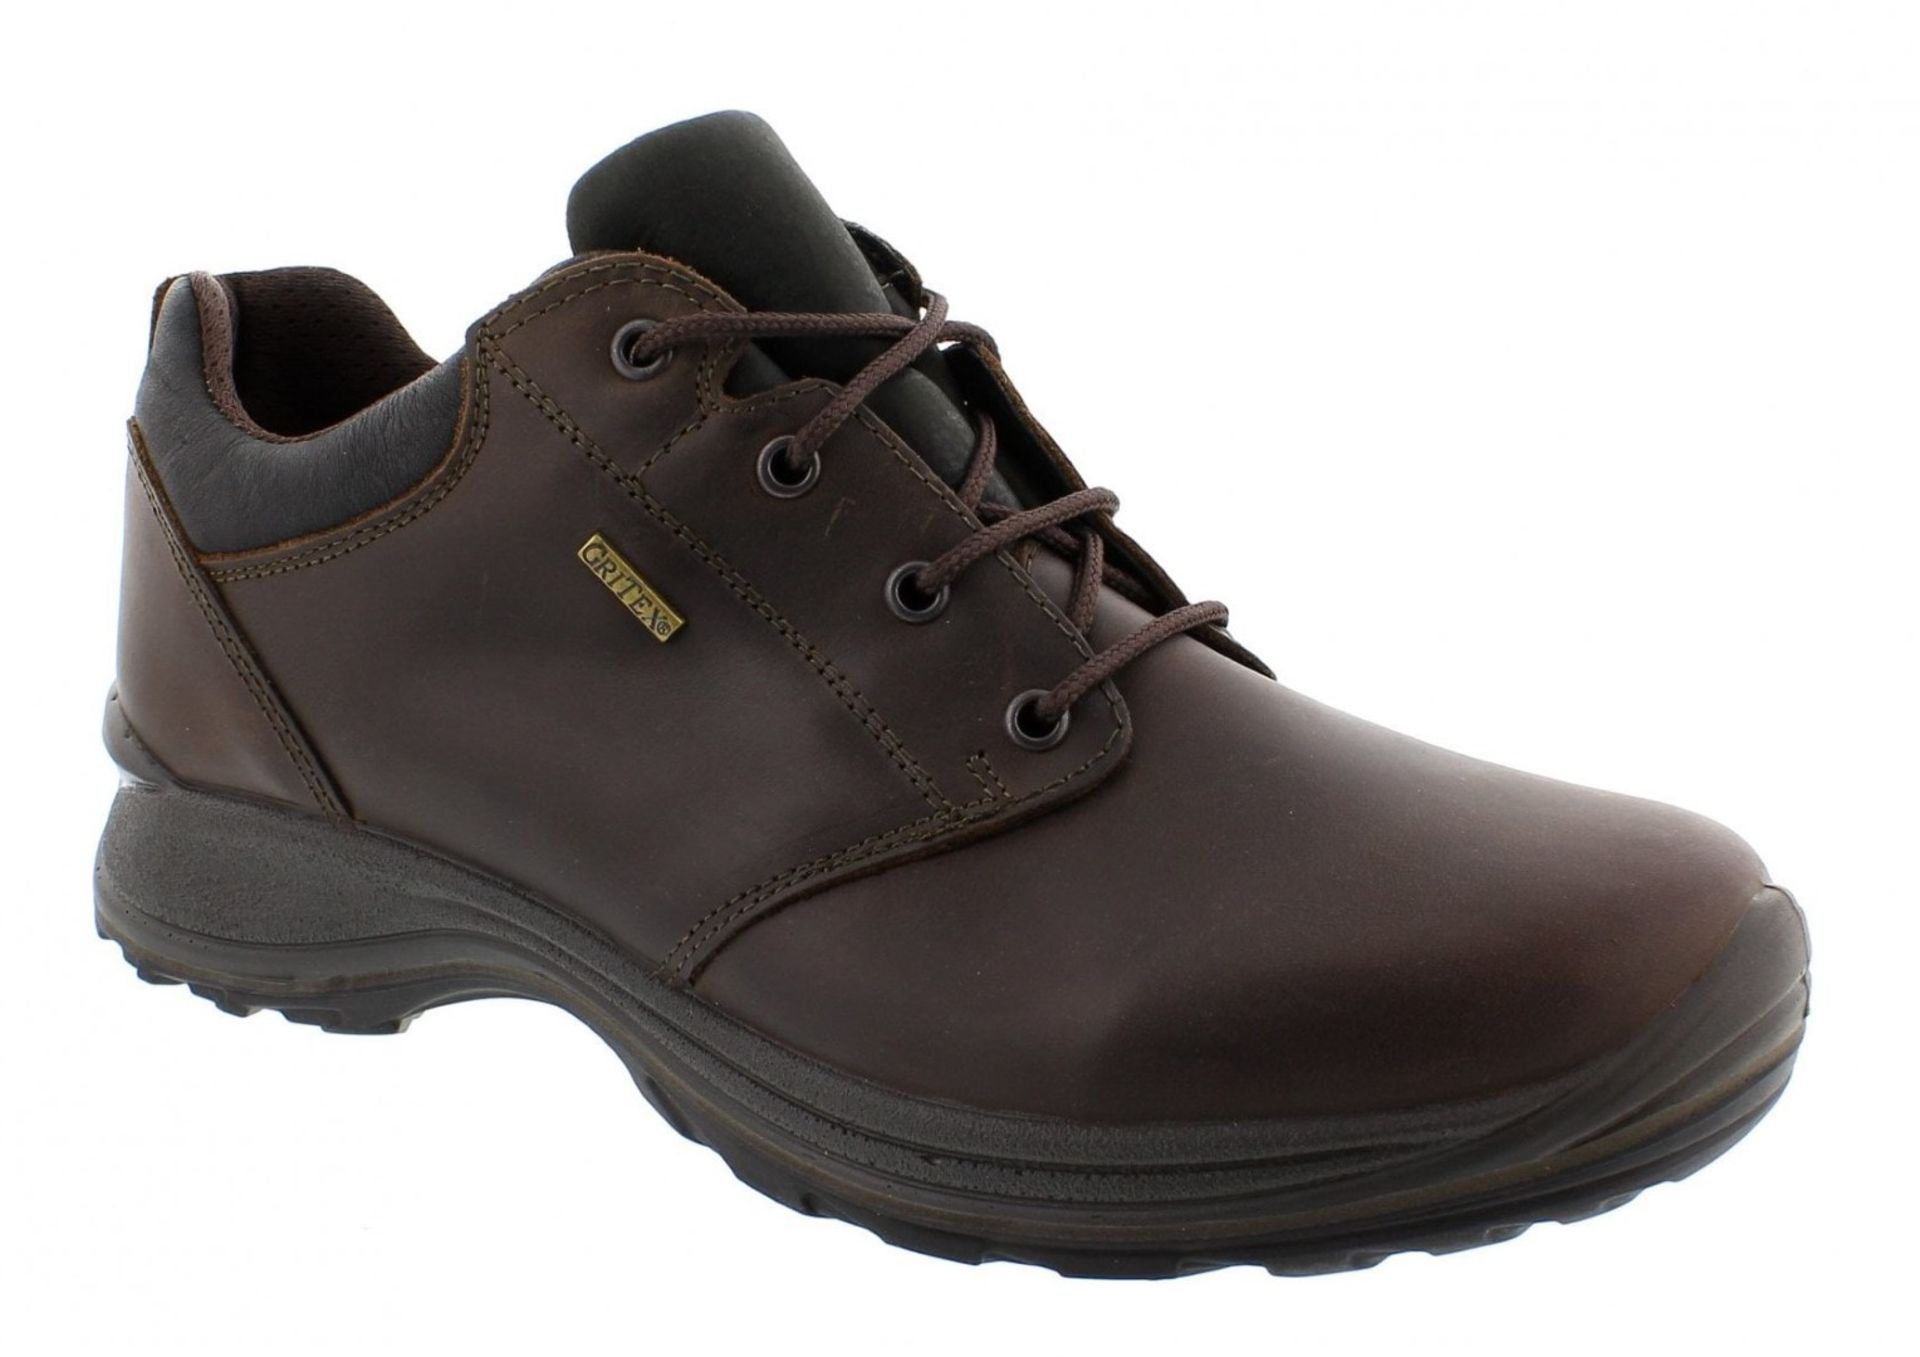 1 x Pair of Men's Grisport Brown Leather GriTex Shoes - Rogerson Footwear - Brand New and Boxed - - Image 2 of 10